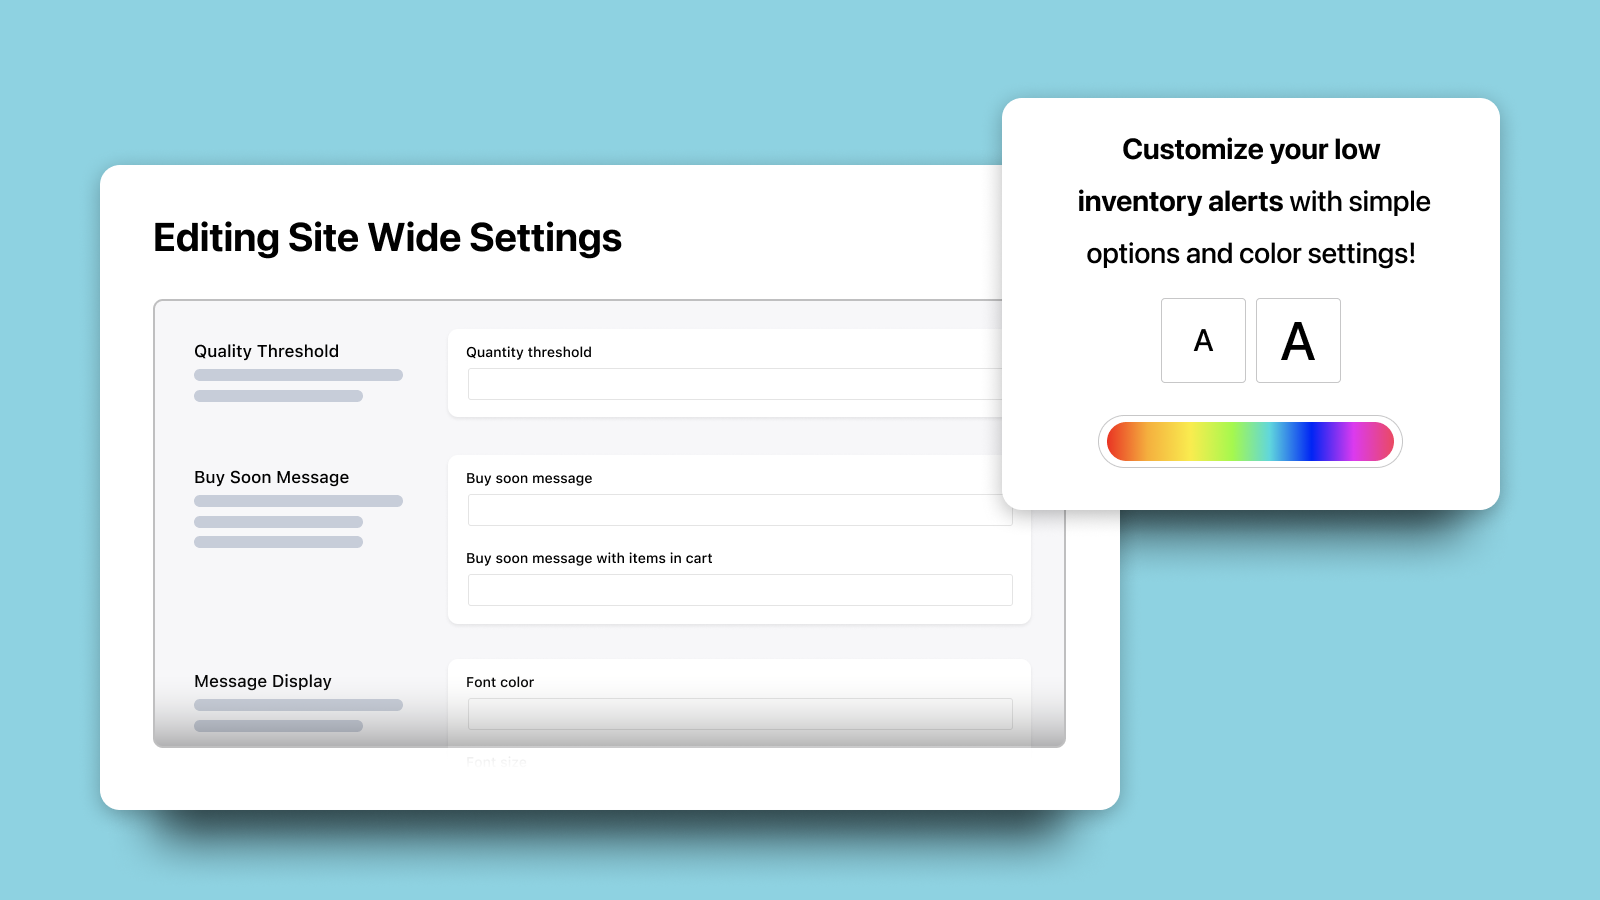 Easy to use settings to choose your own messaging, color, & more